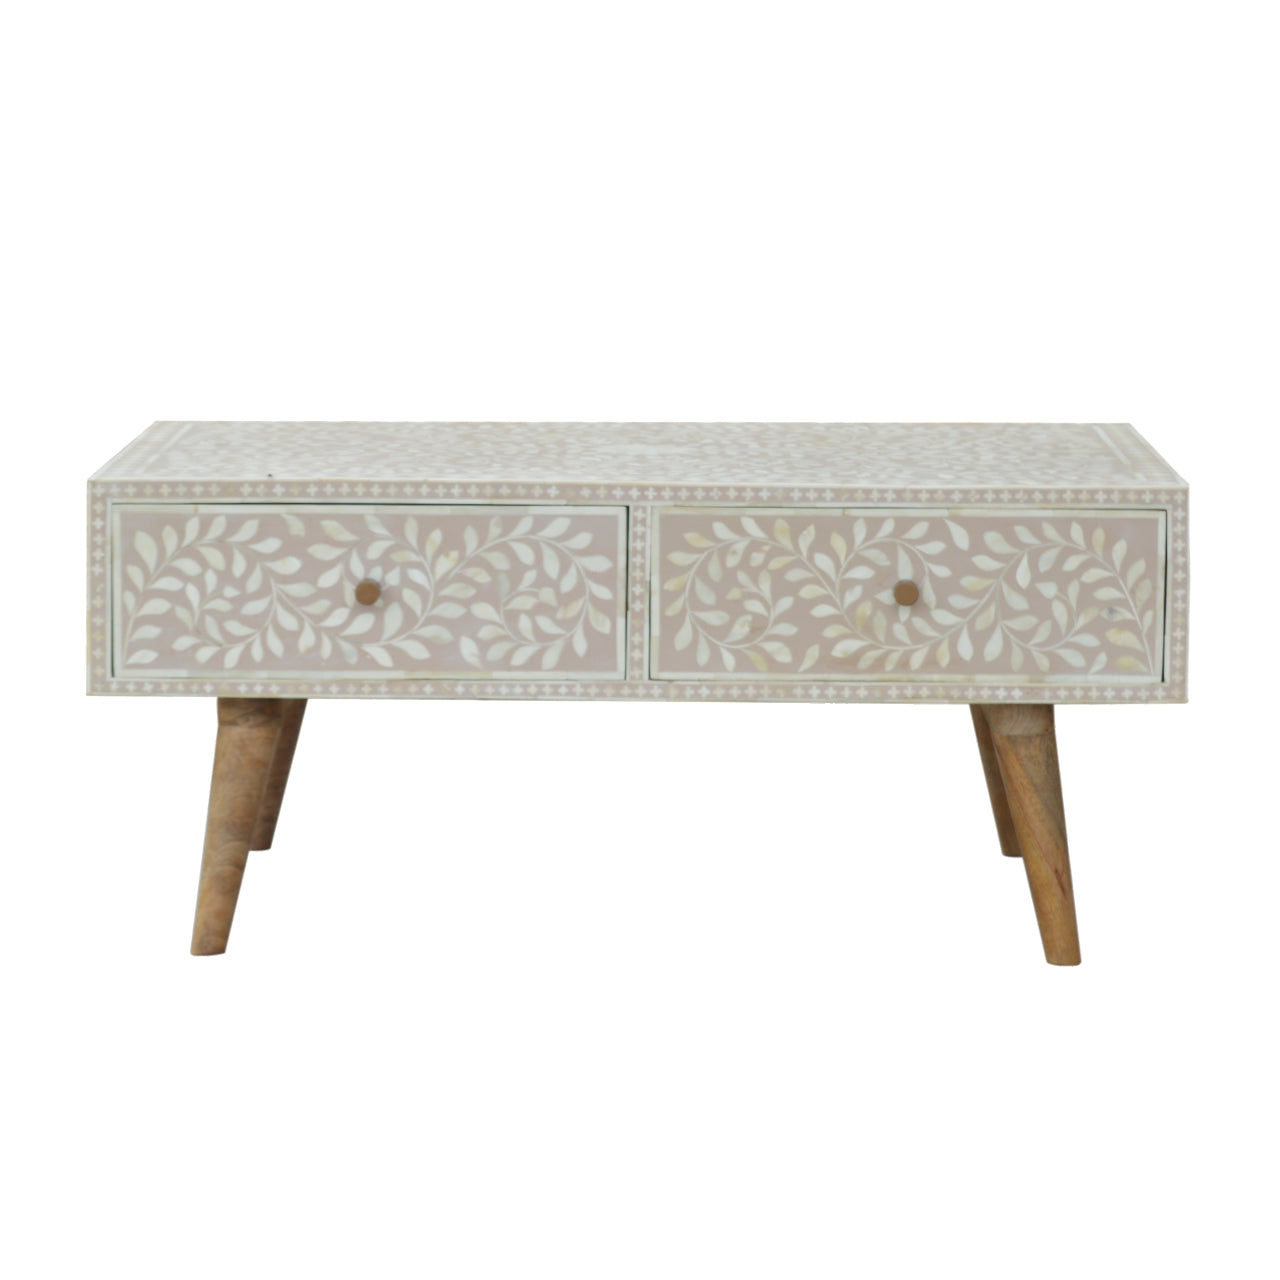 View Taupe Floral Bone Coffee Table information